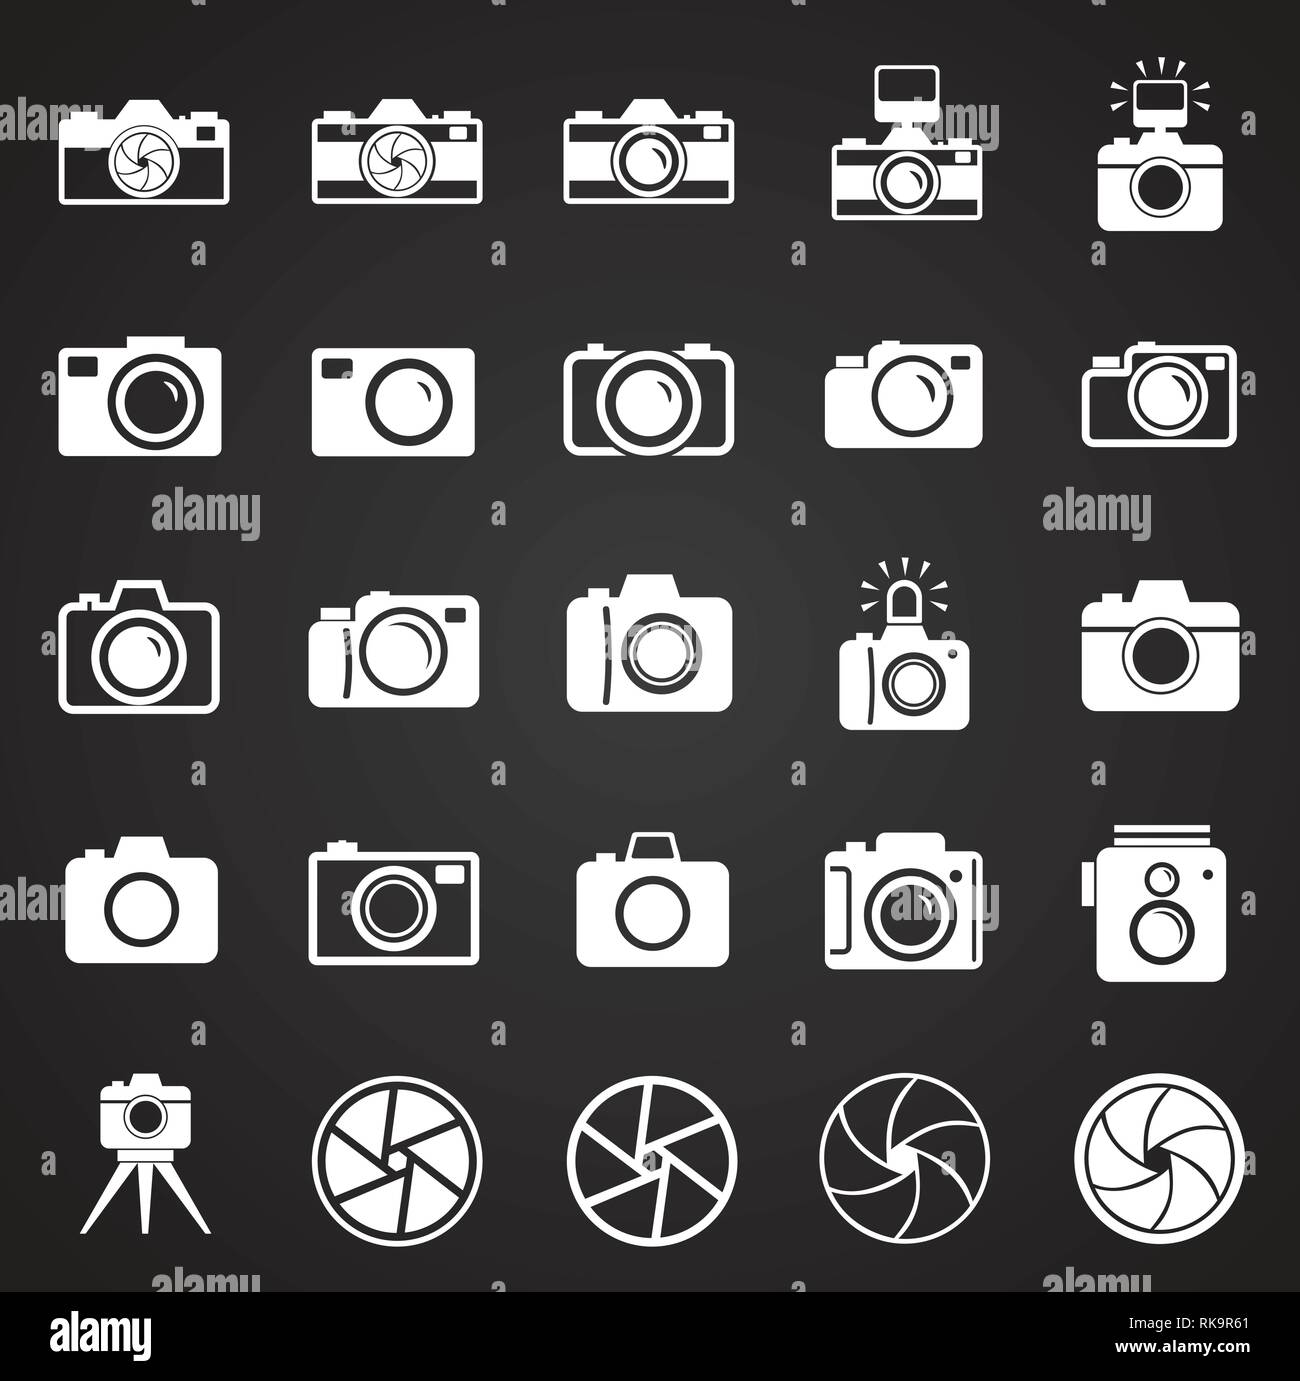 Video Camera Icon On Black Background Stock Vector (Royalty Free) 429840745  | Shutterstock